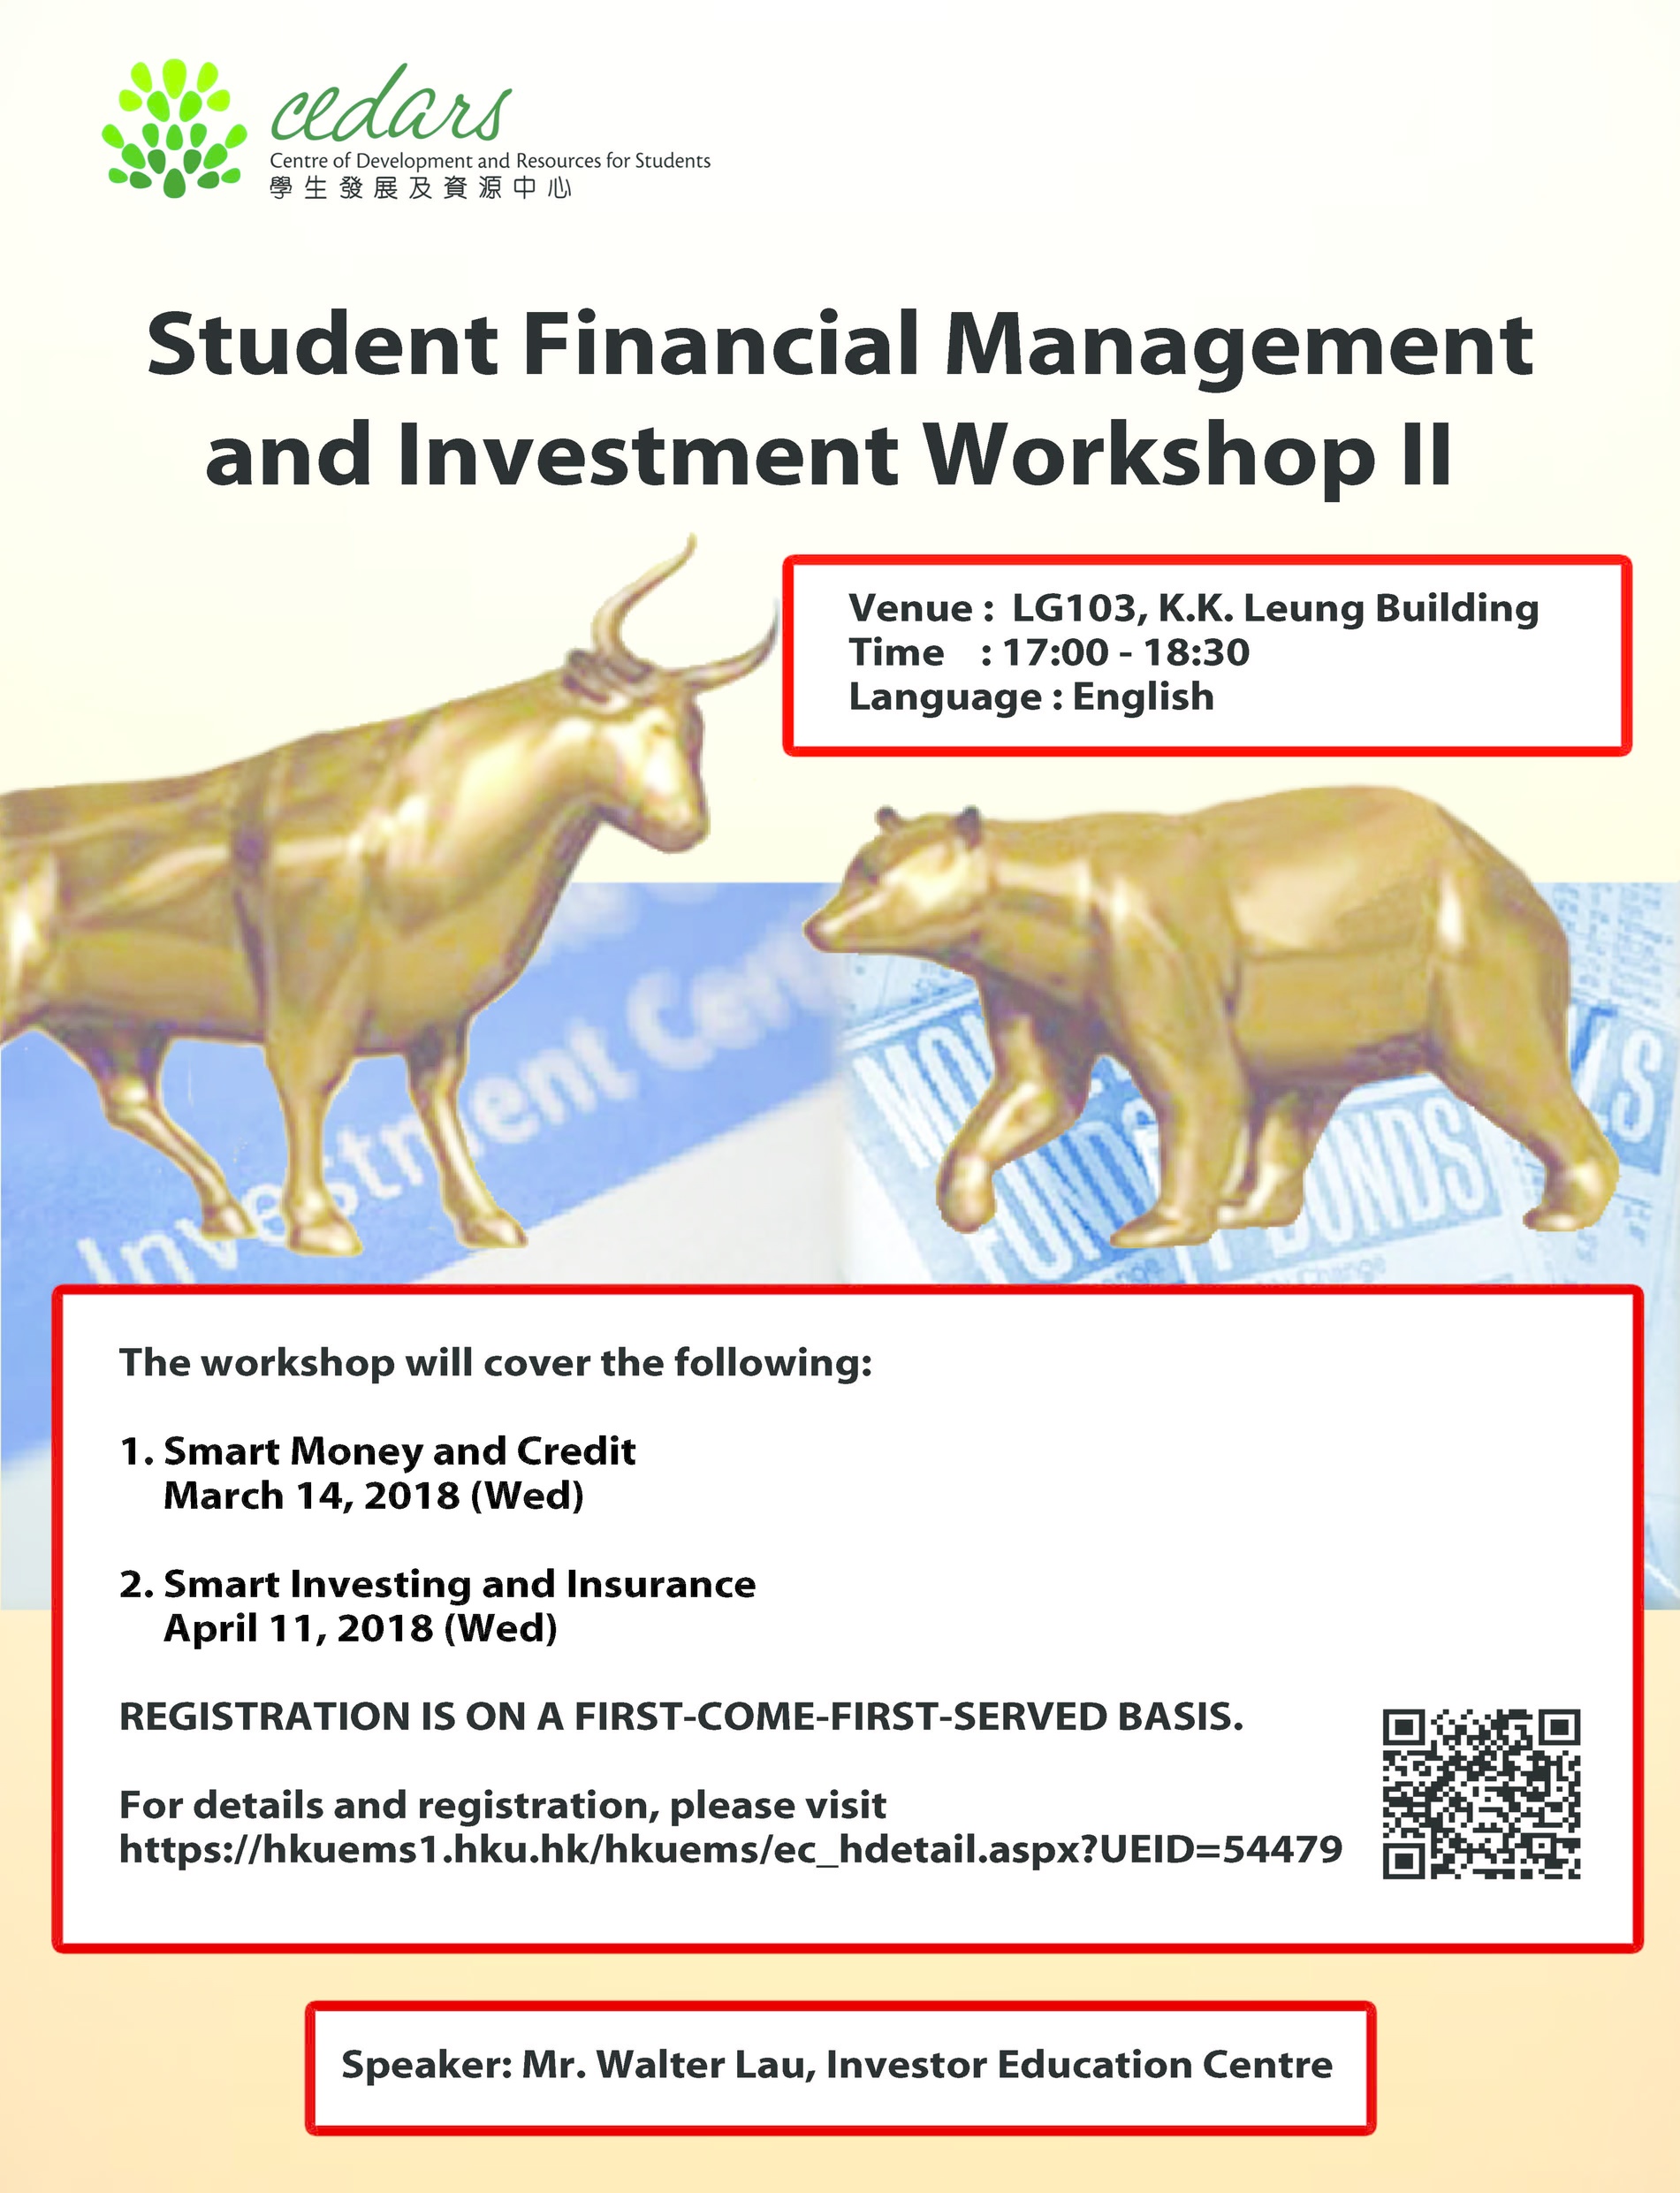 Student Financial Management and Investment Workshop II